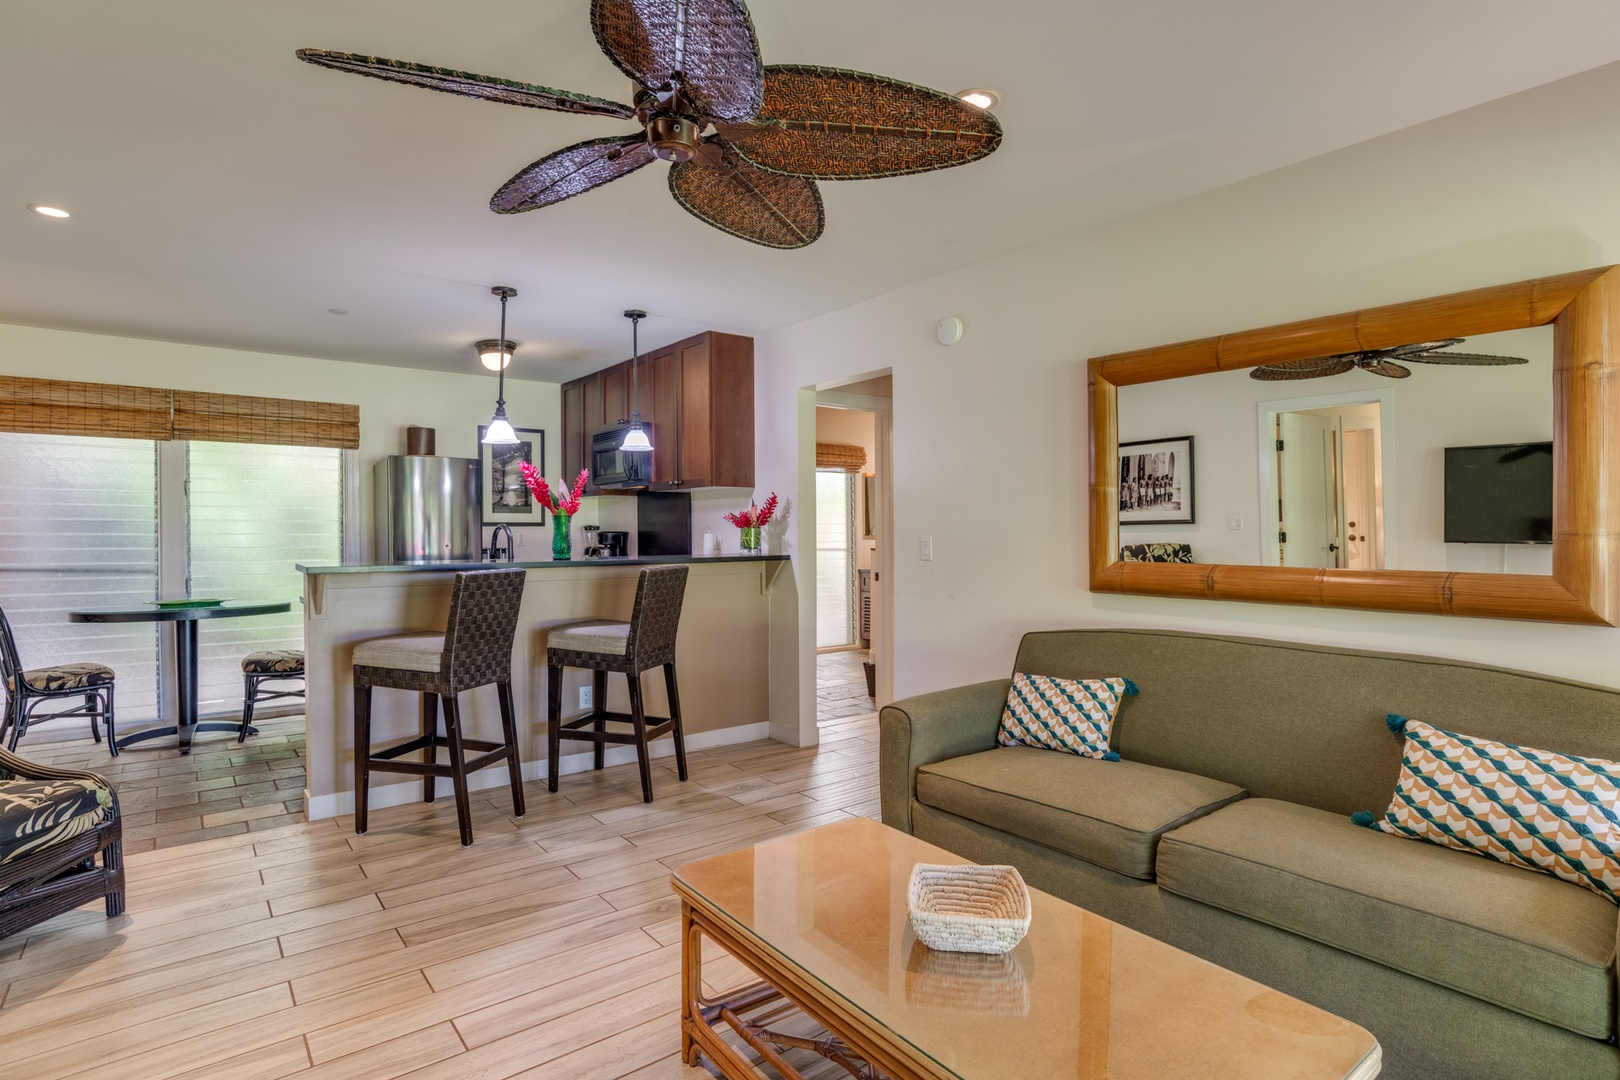 Lahaina Vacation Rentals, Aina Nalu D103 - Relax on the couch after a long day of island adventures